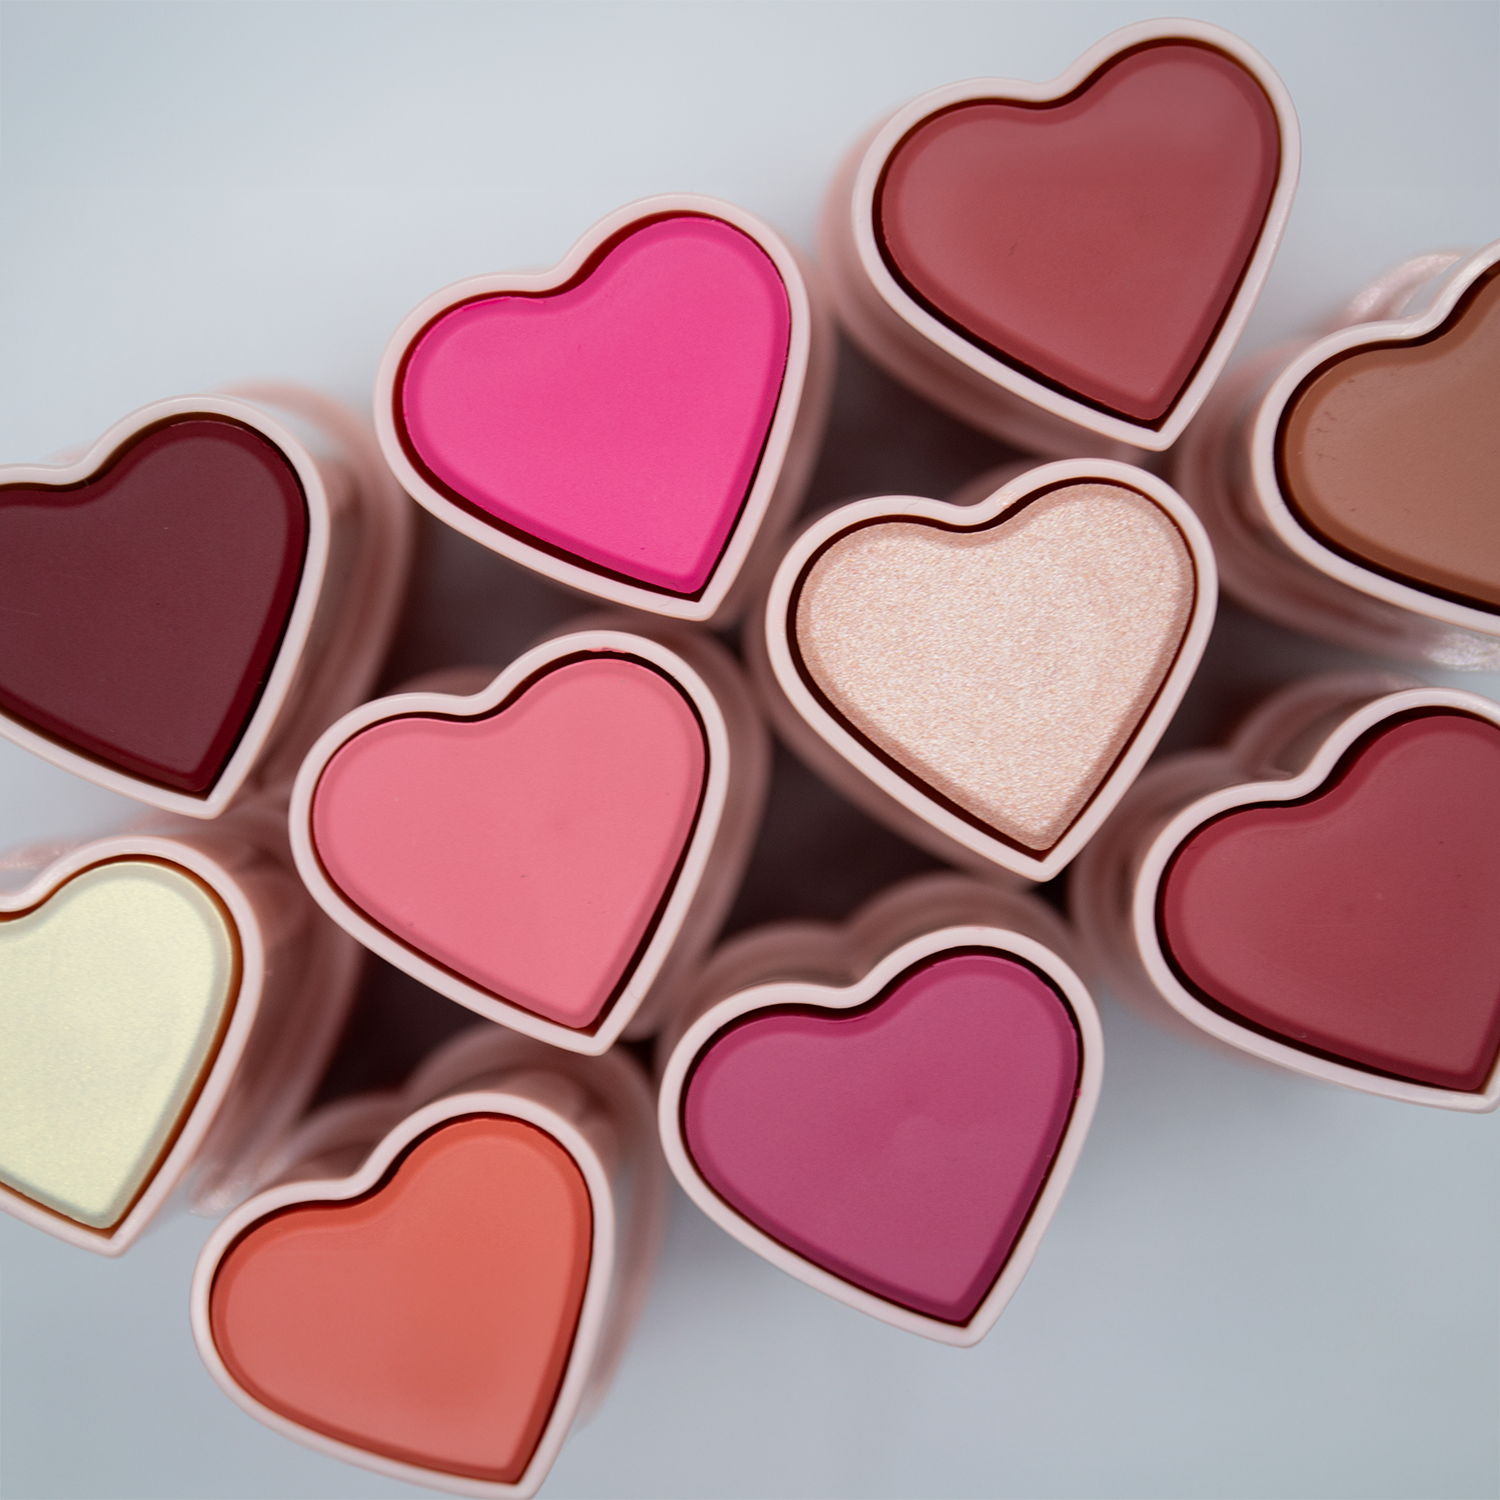 All Dare To Blush heart-shaped blush stick viewed from the top. Colors range from light gold to dark red.